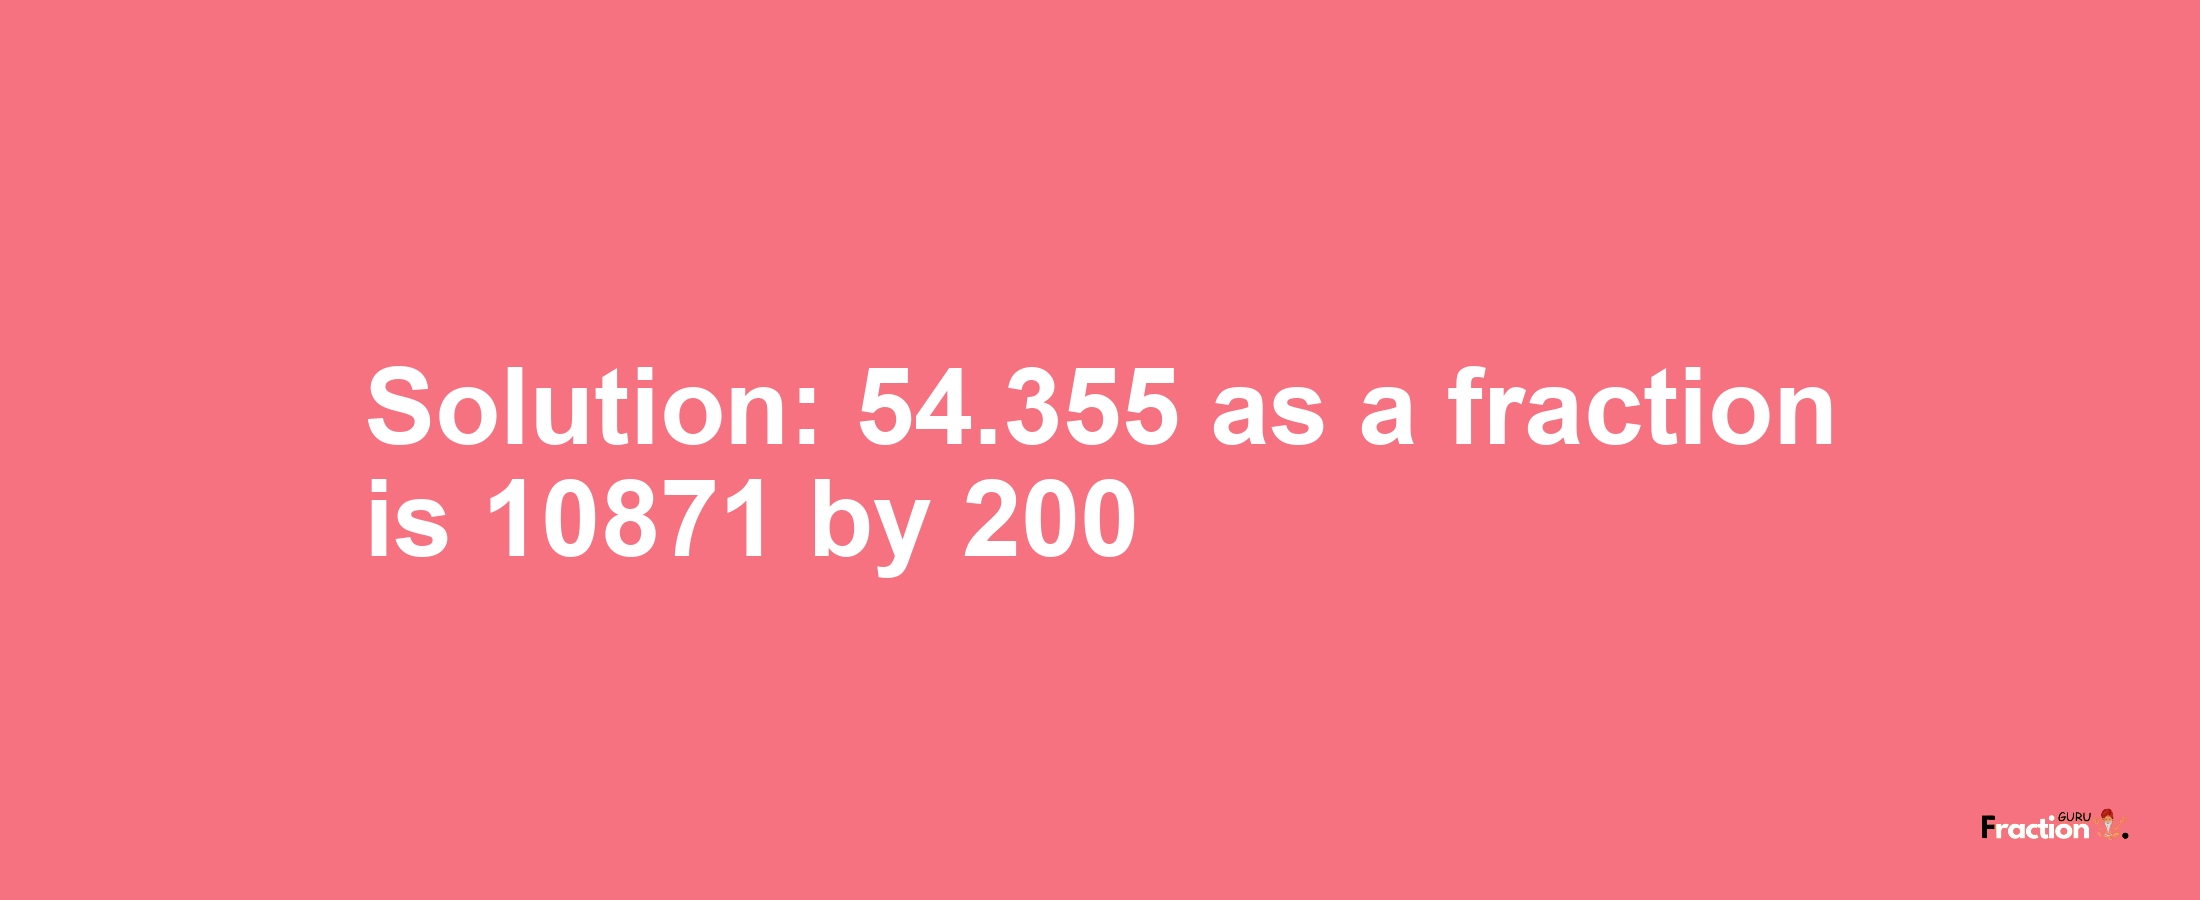 Solution:54.355 as a fraction is 10871/200